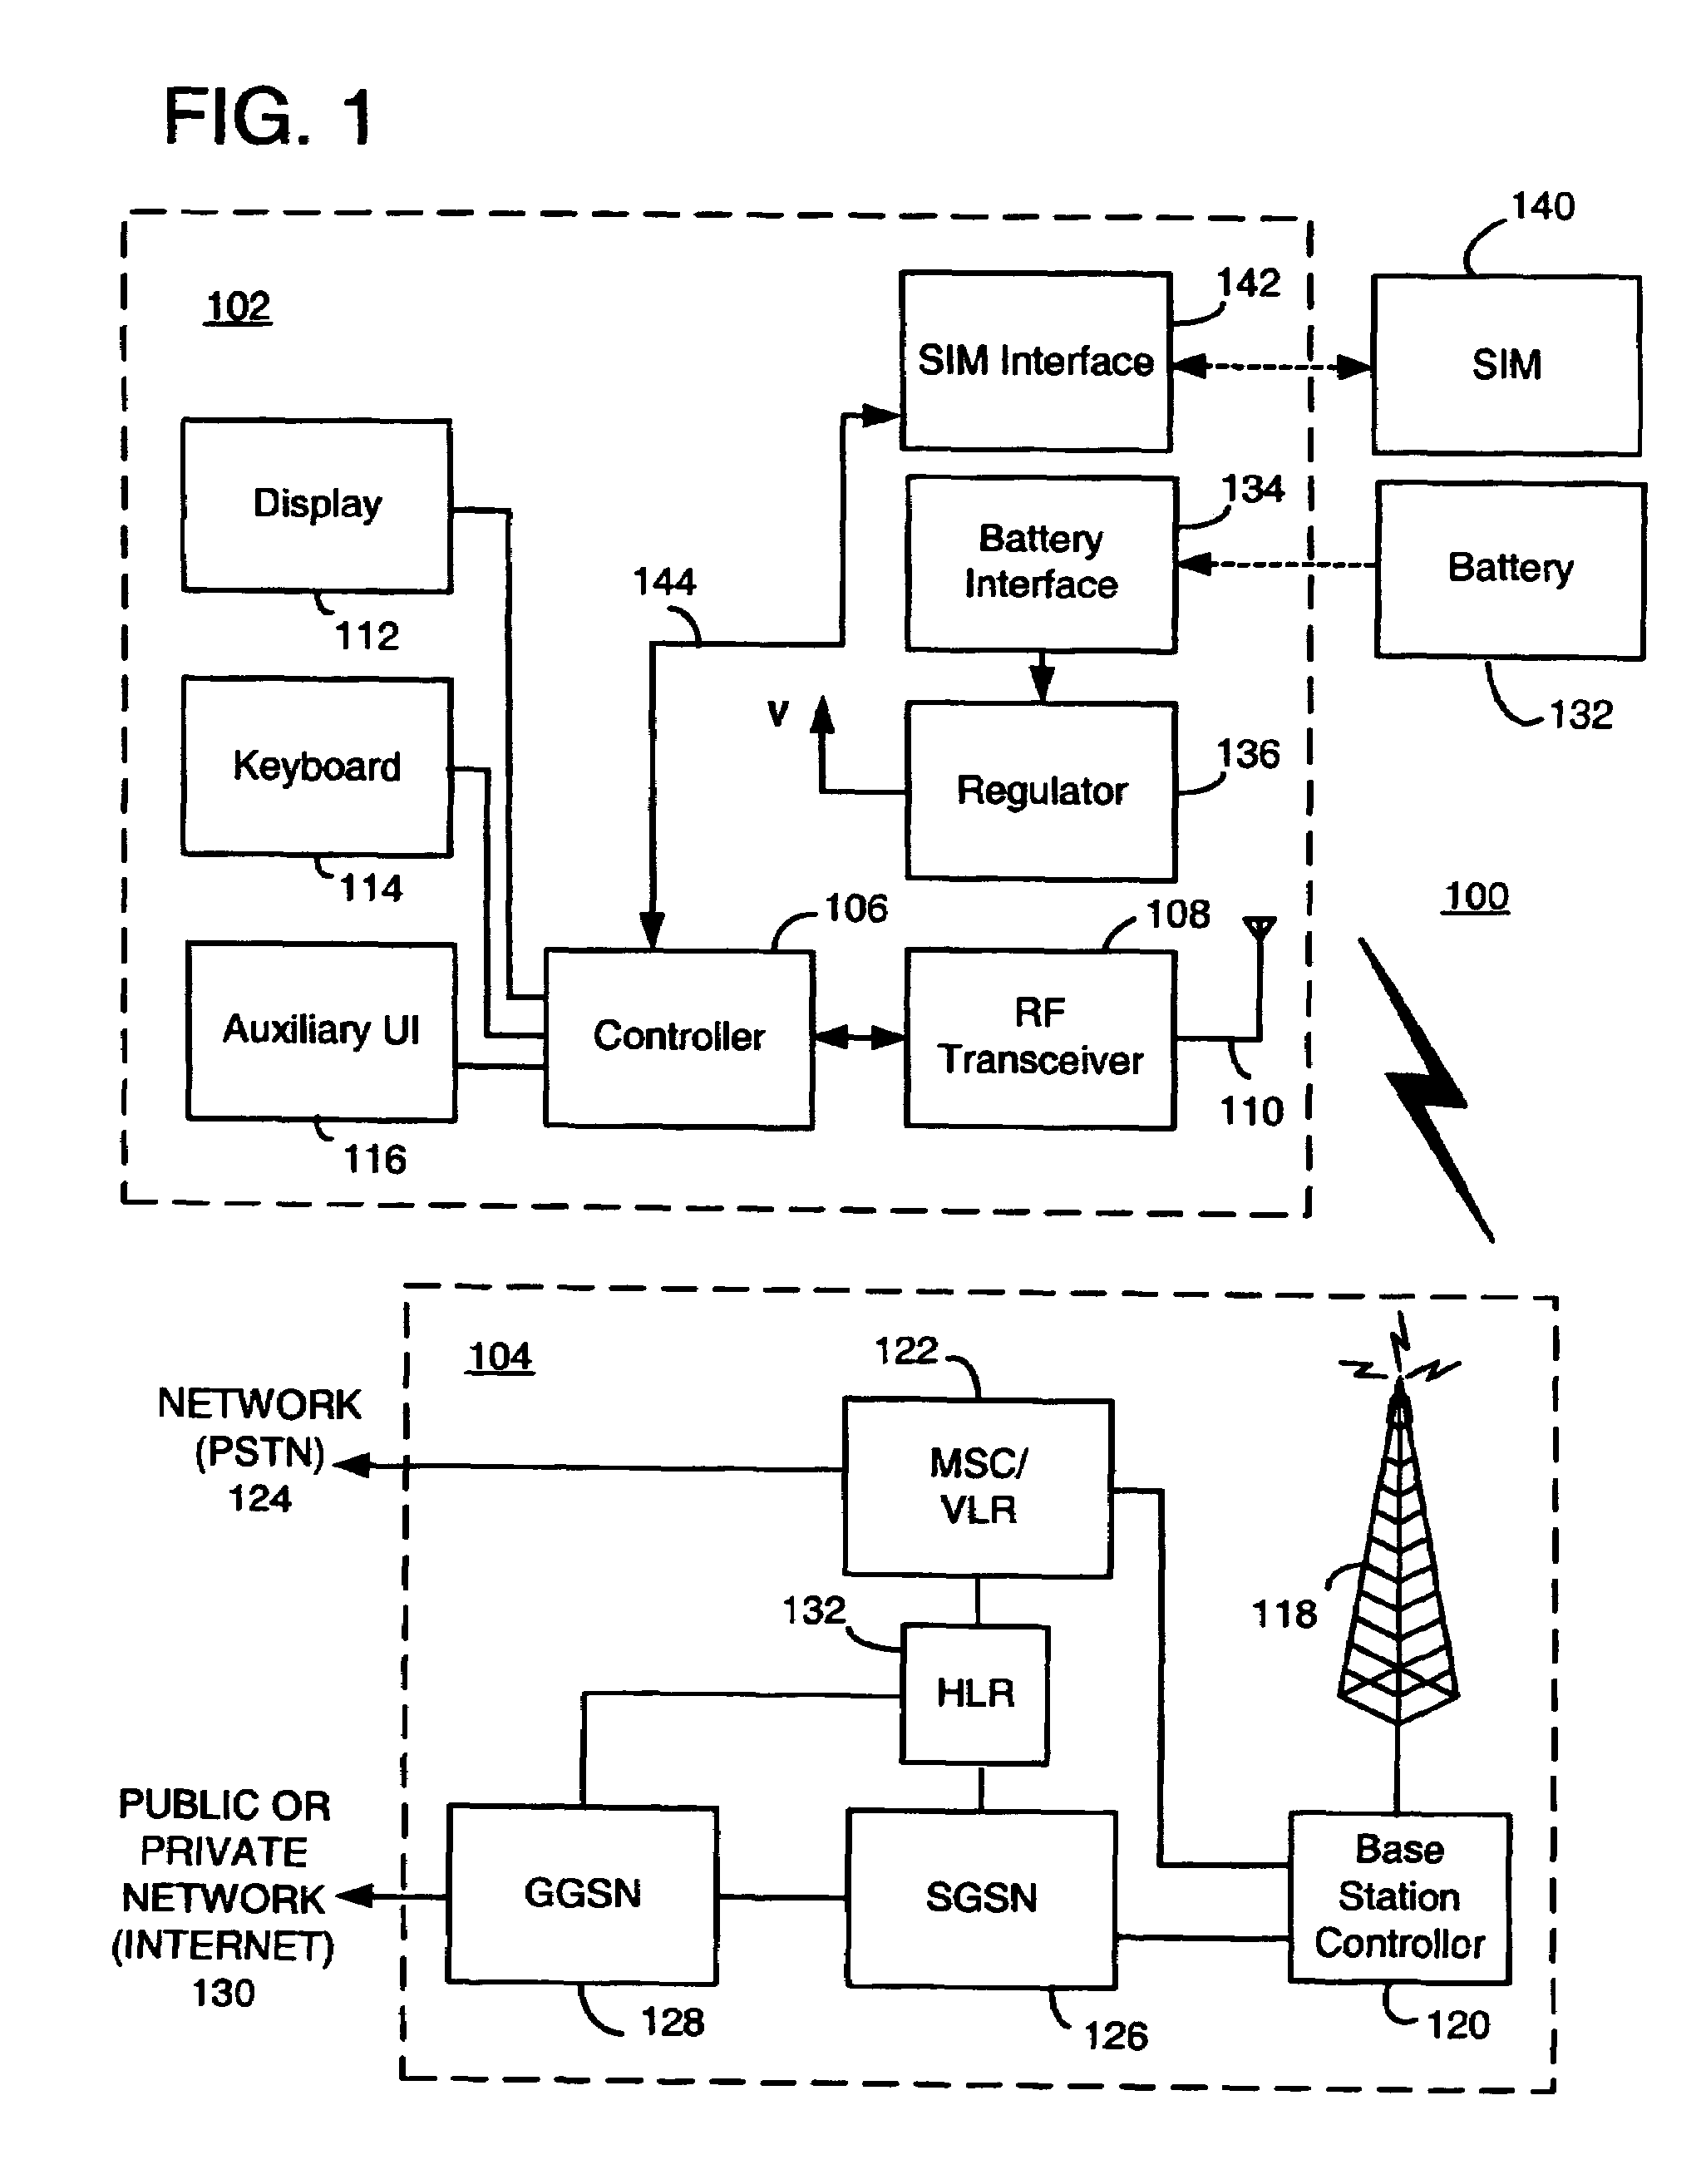 Home network name displaying methods and apparatus for multiple home networks